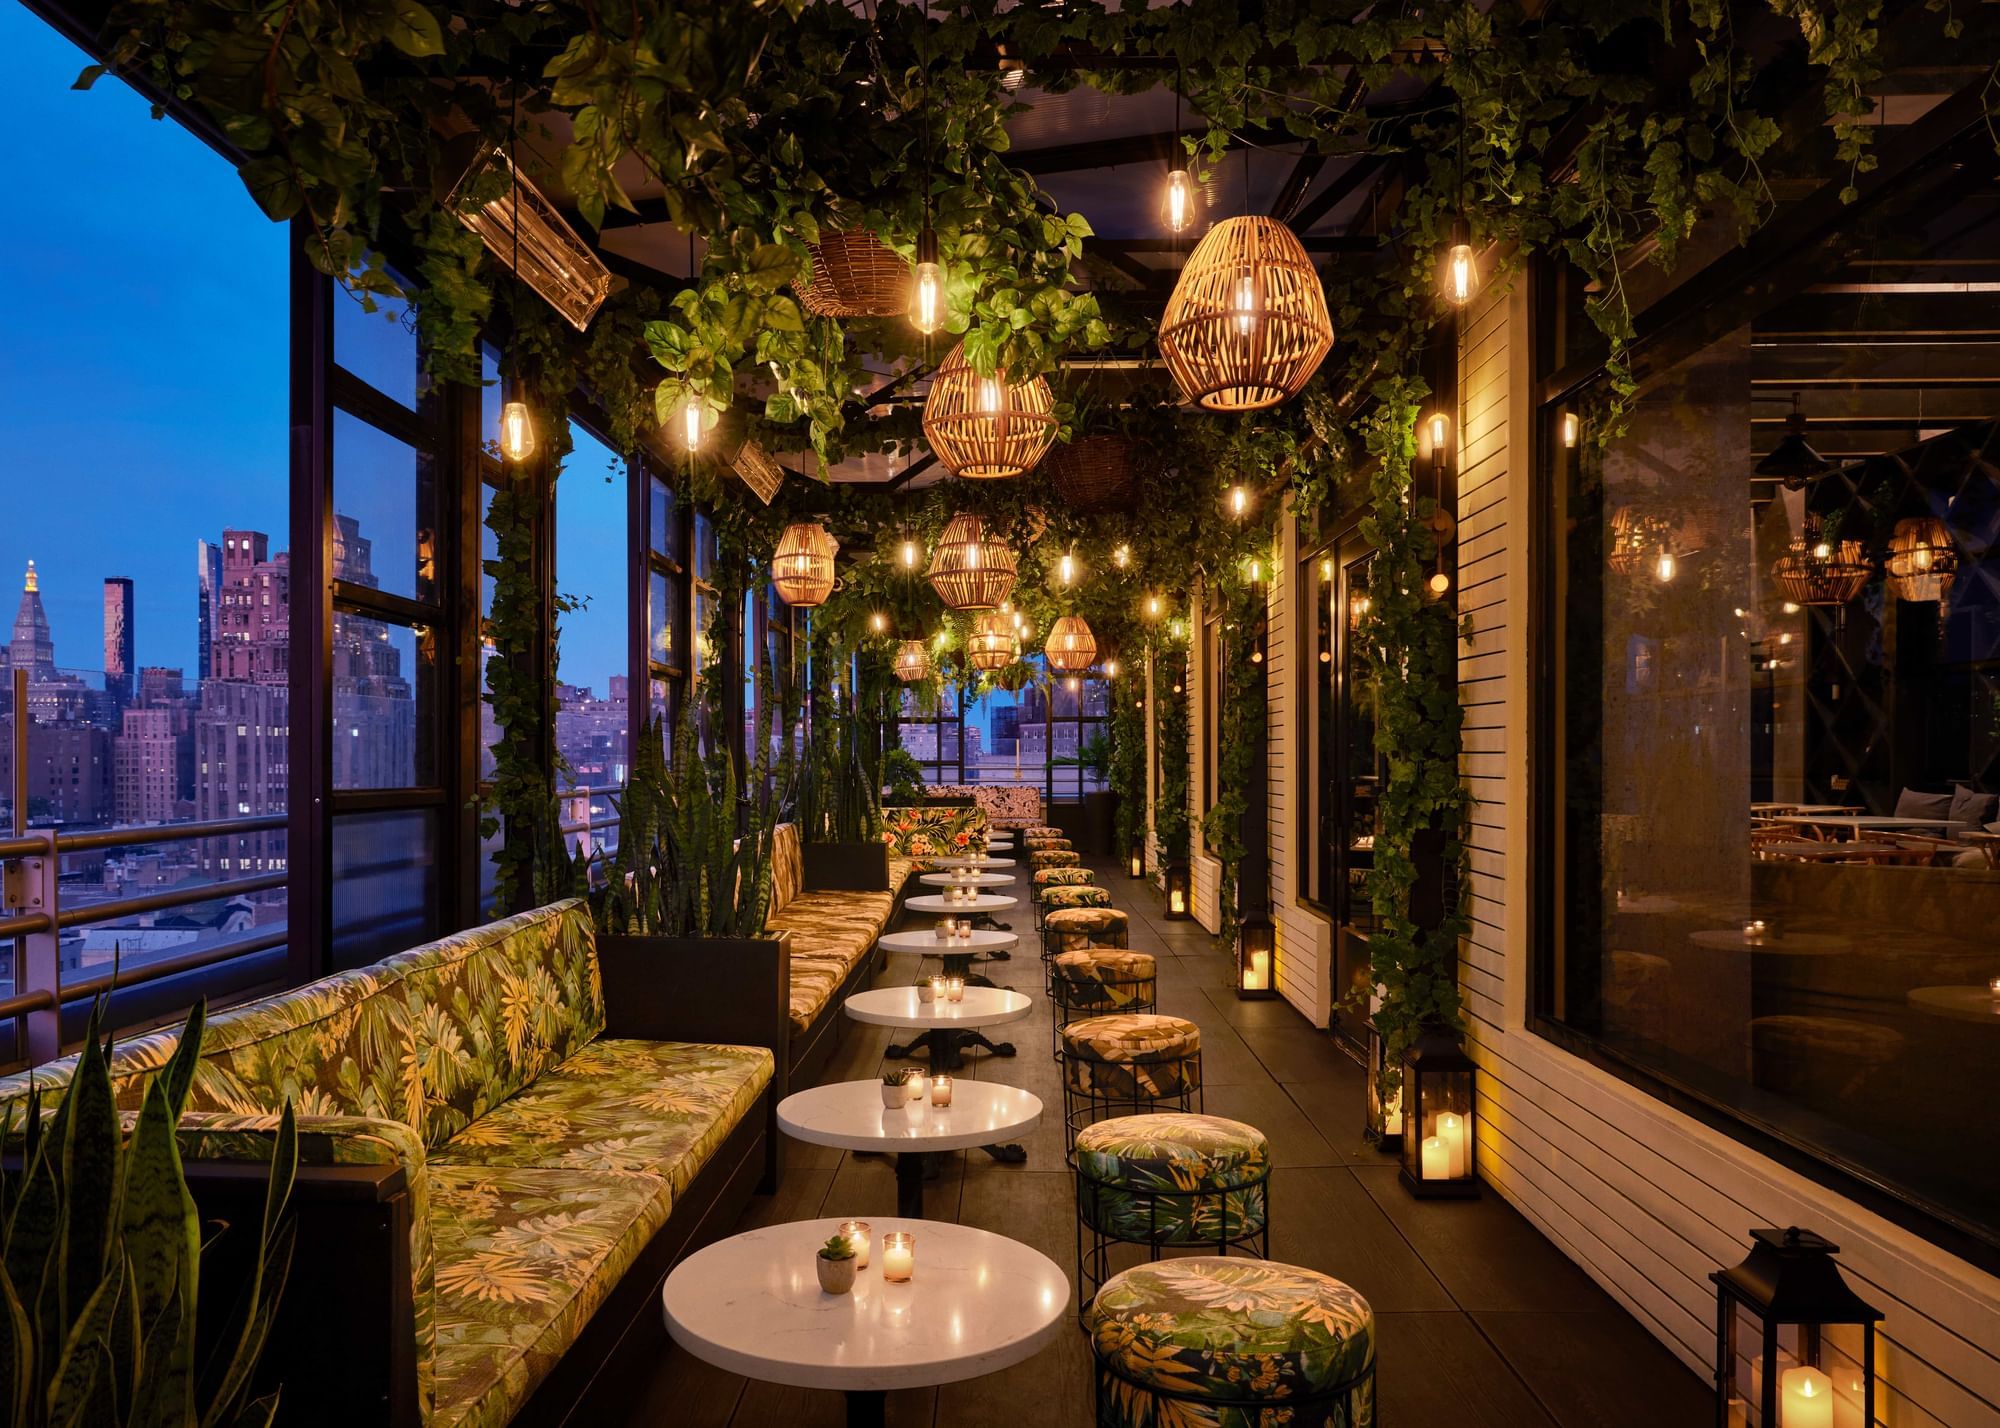 Outdoor seating at Gansevoort Rooftop with the Manhattan skyline in the background at night